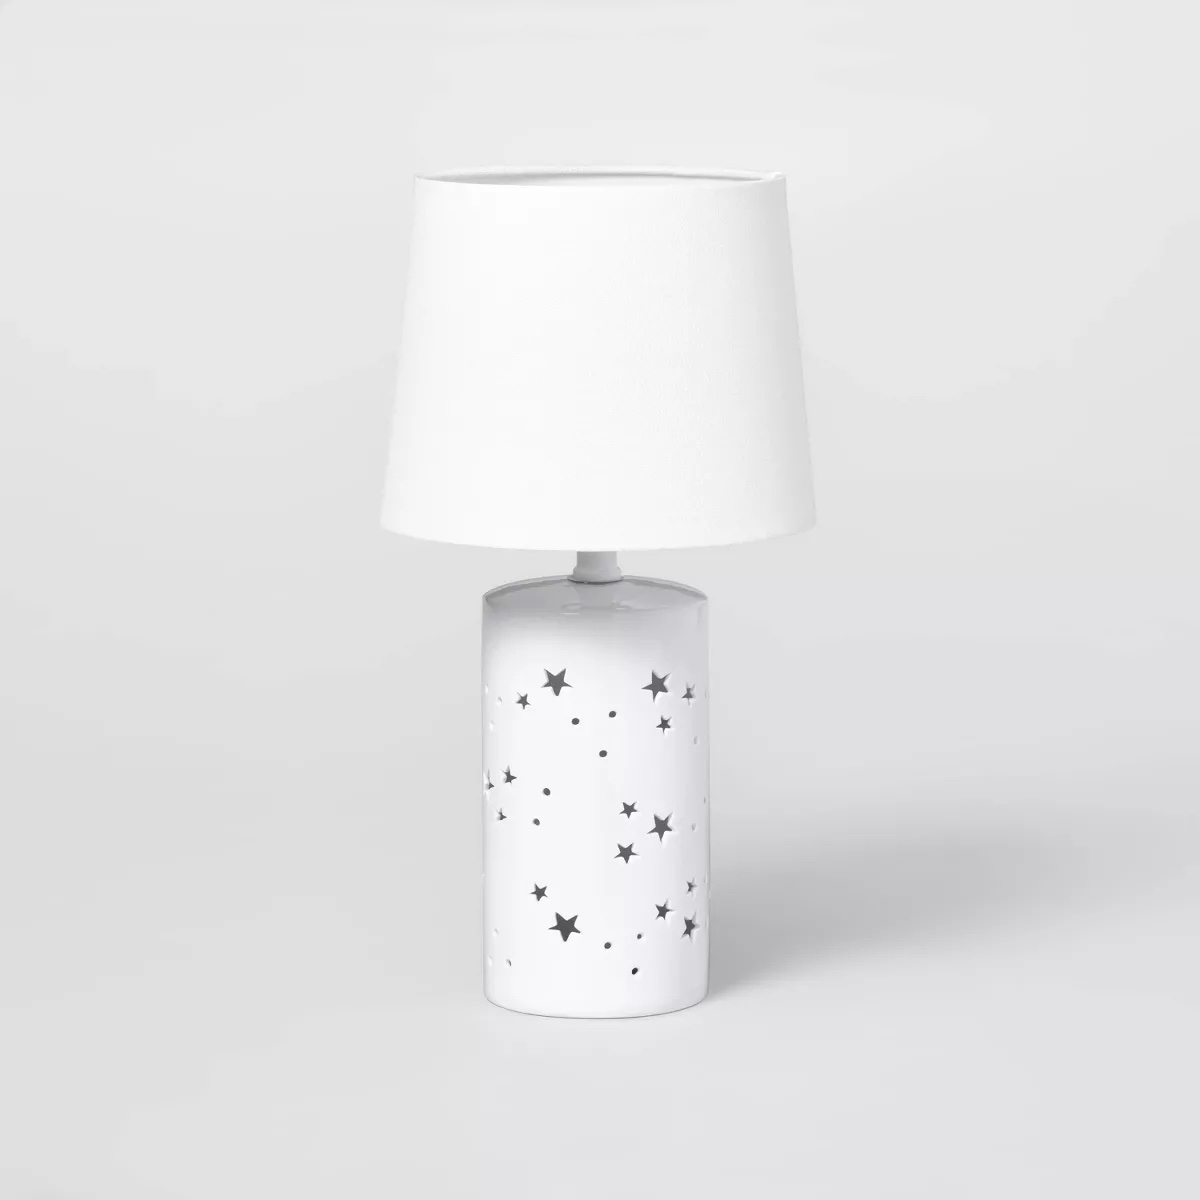 Table lamp with a star-patterned base and plain lampshade